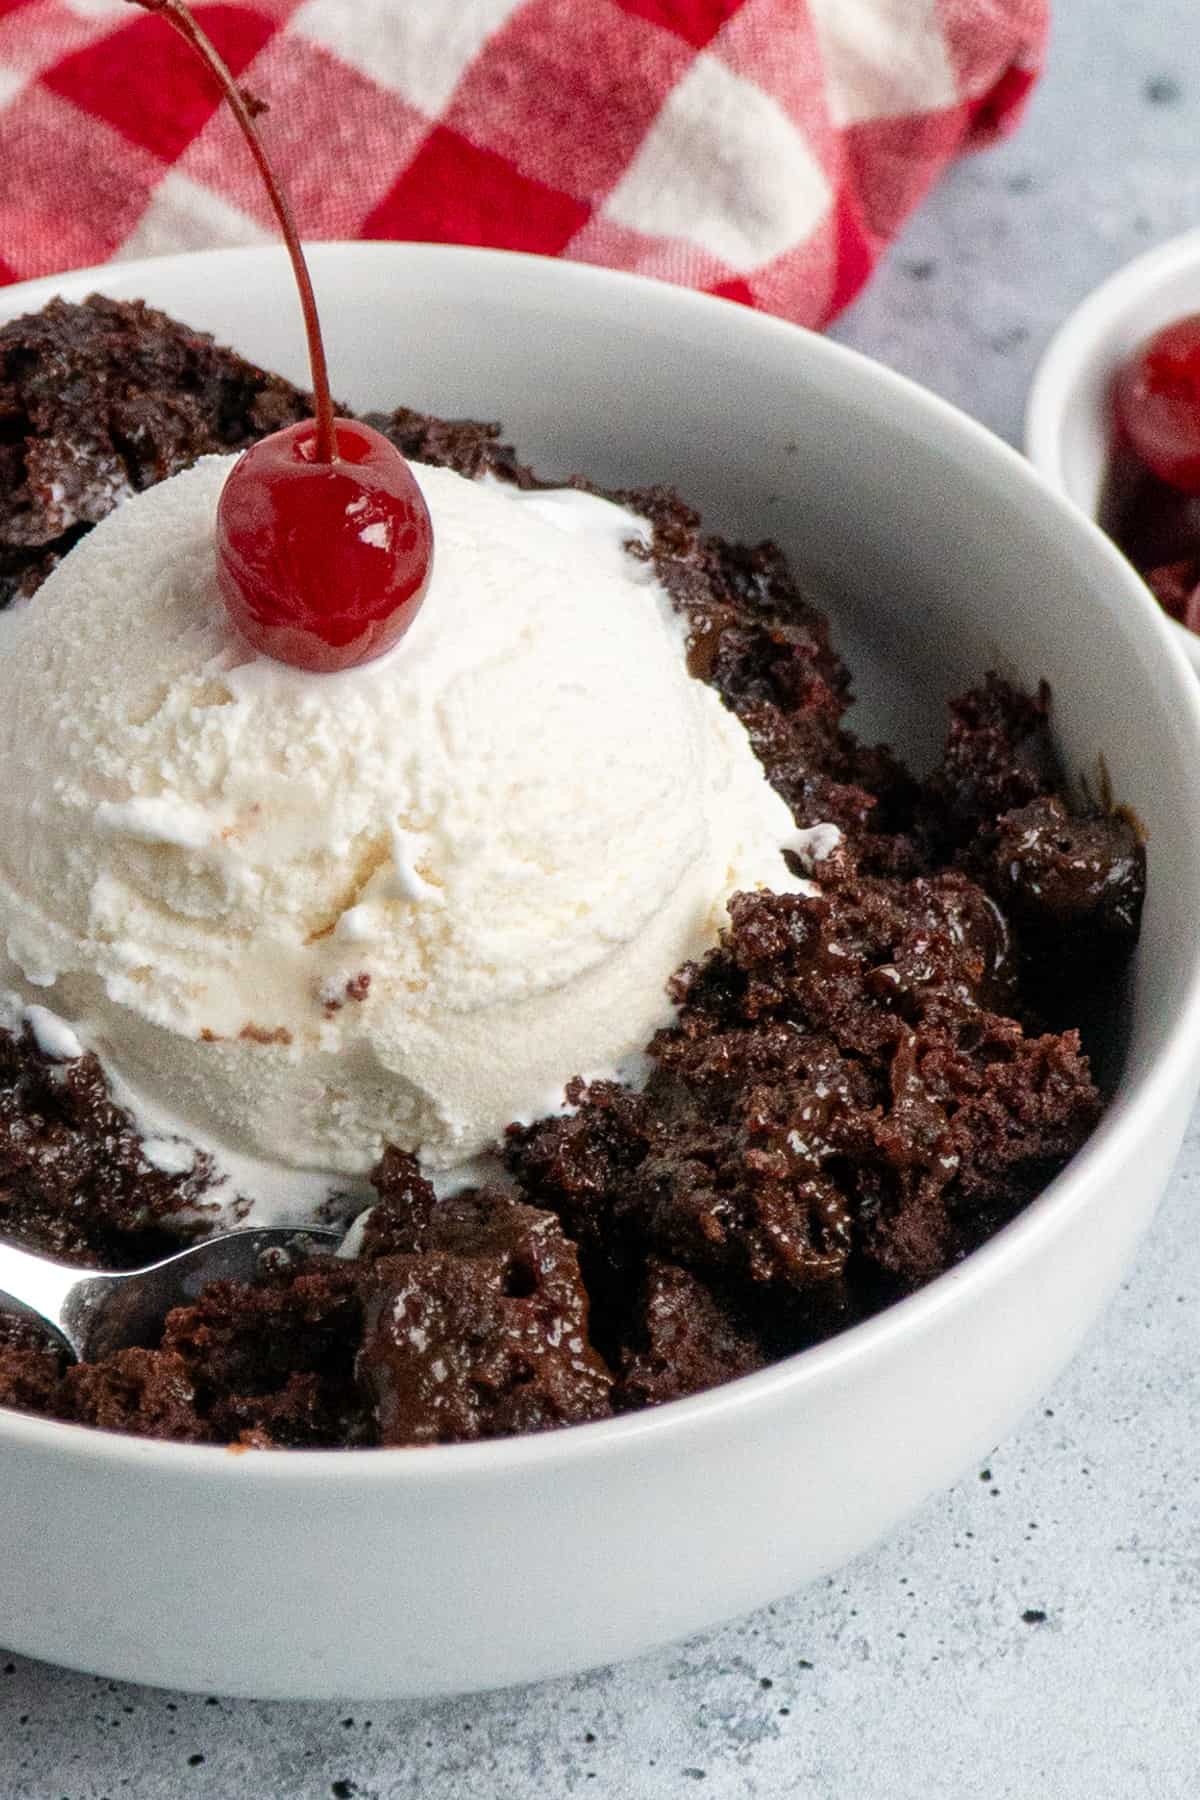 Crock pot choccolate lava cake with ice cream and a cherry on top.